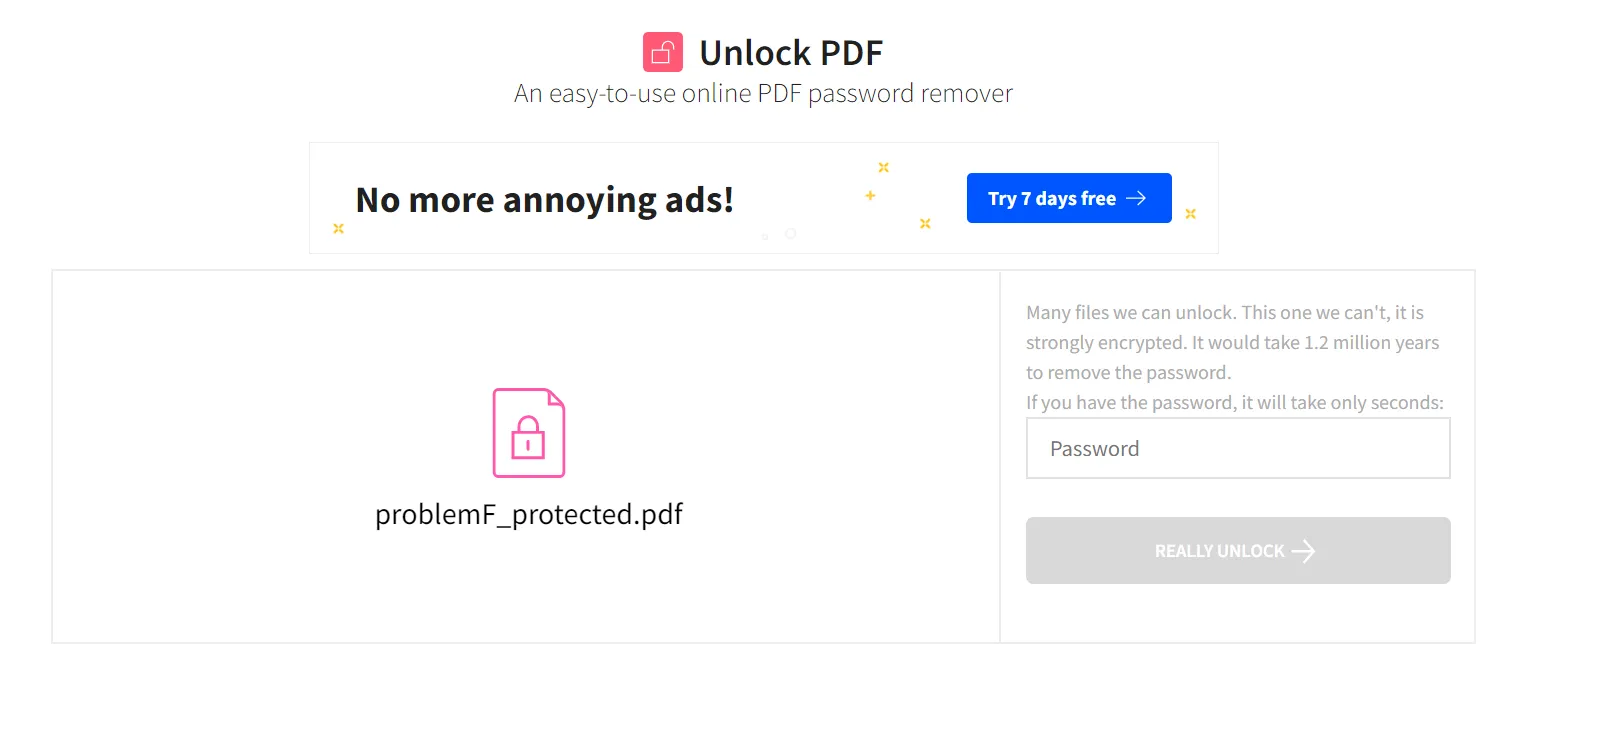 How to Remove a Password from a PDF File, Figure 11: Unlock PDF